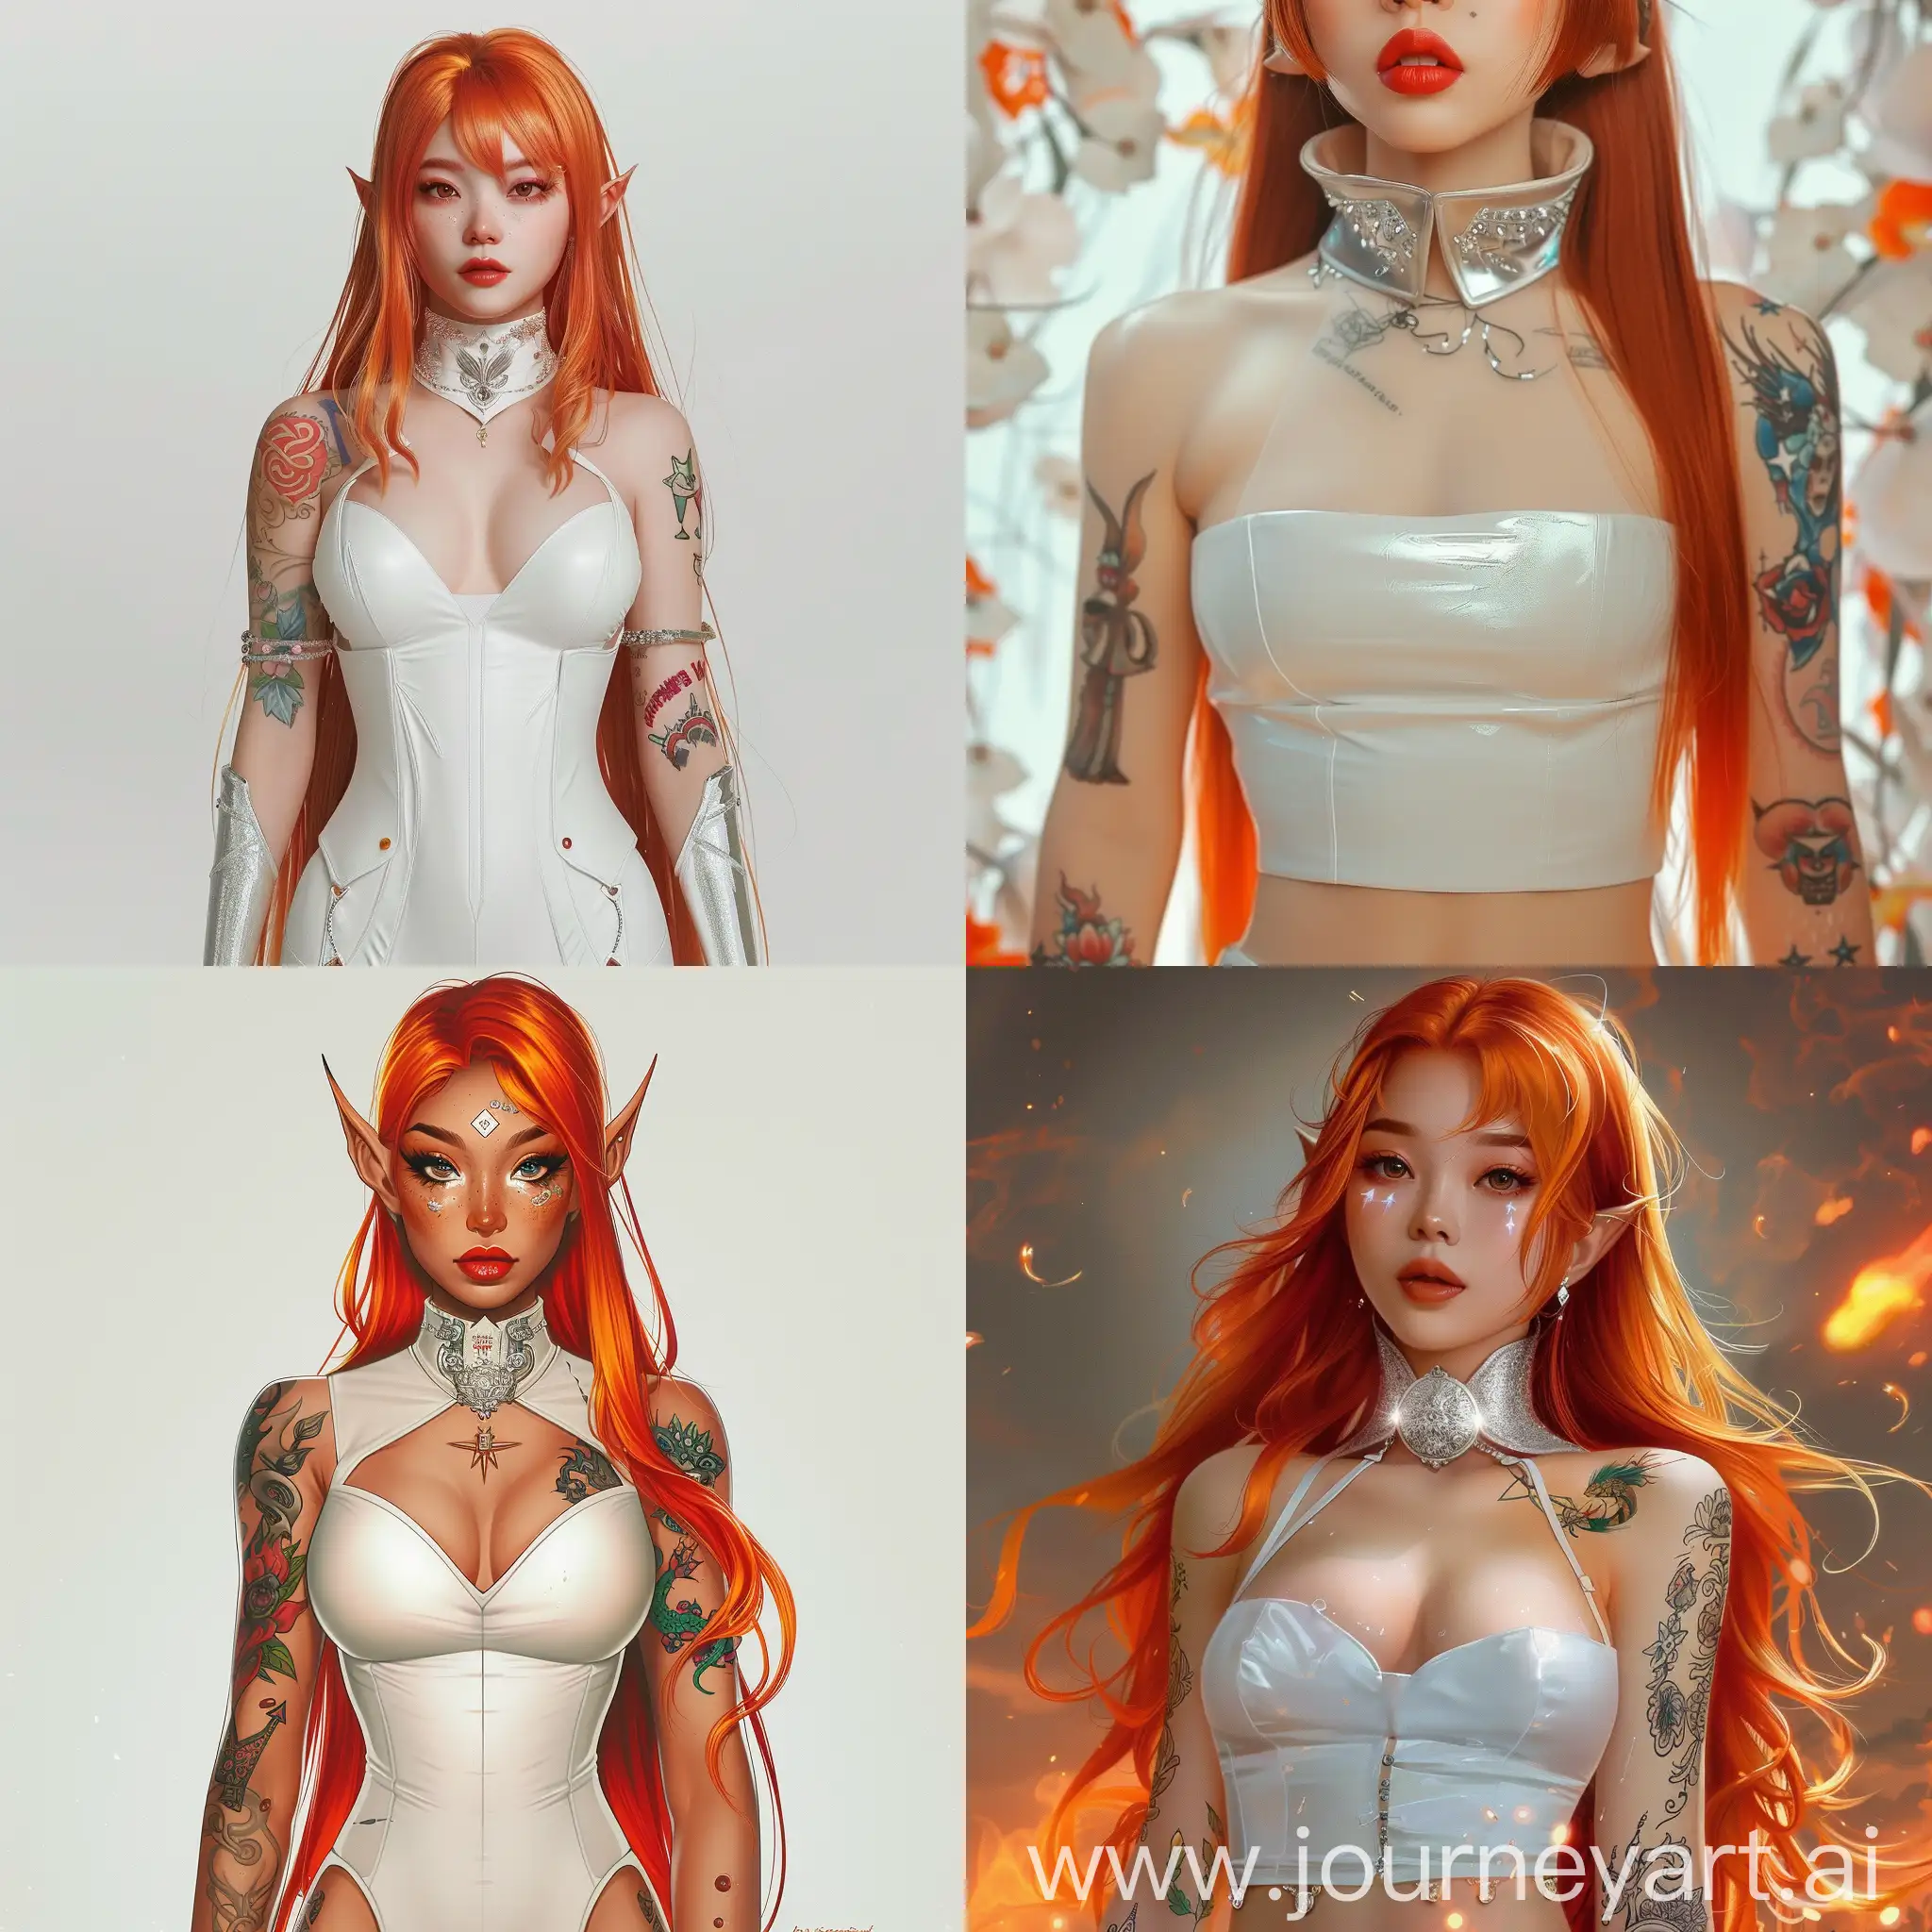 Sensual-Beauty-in-White-Dress-with-Dazzling-Tattoos-and-Fiery-Hair